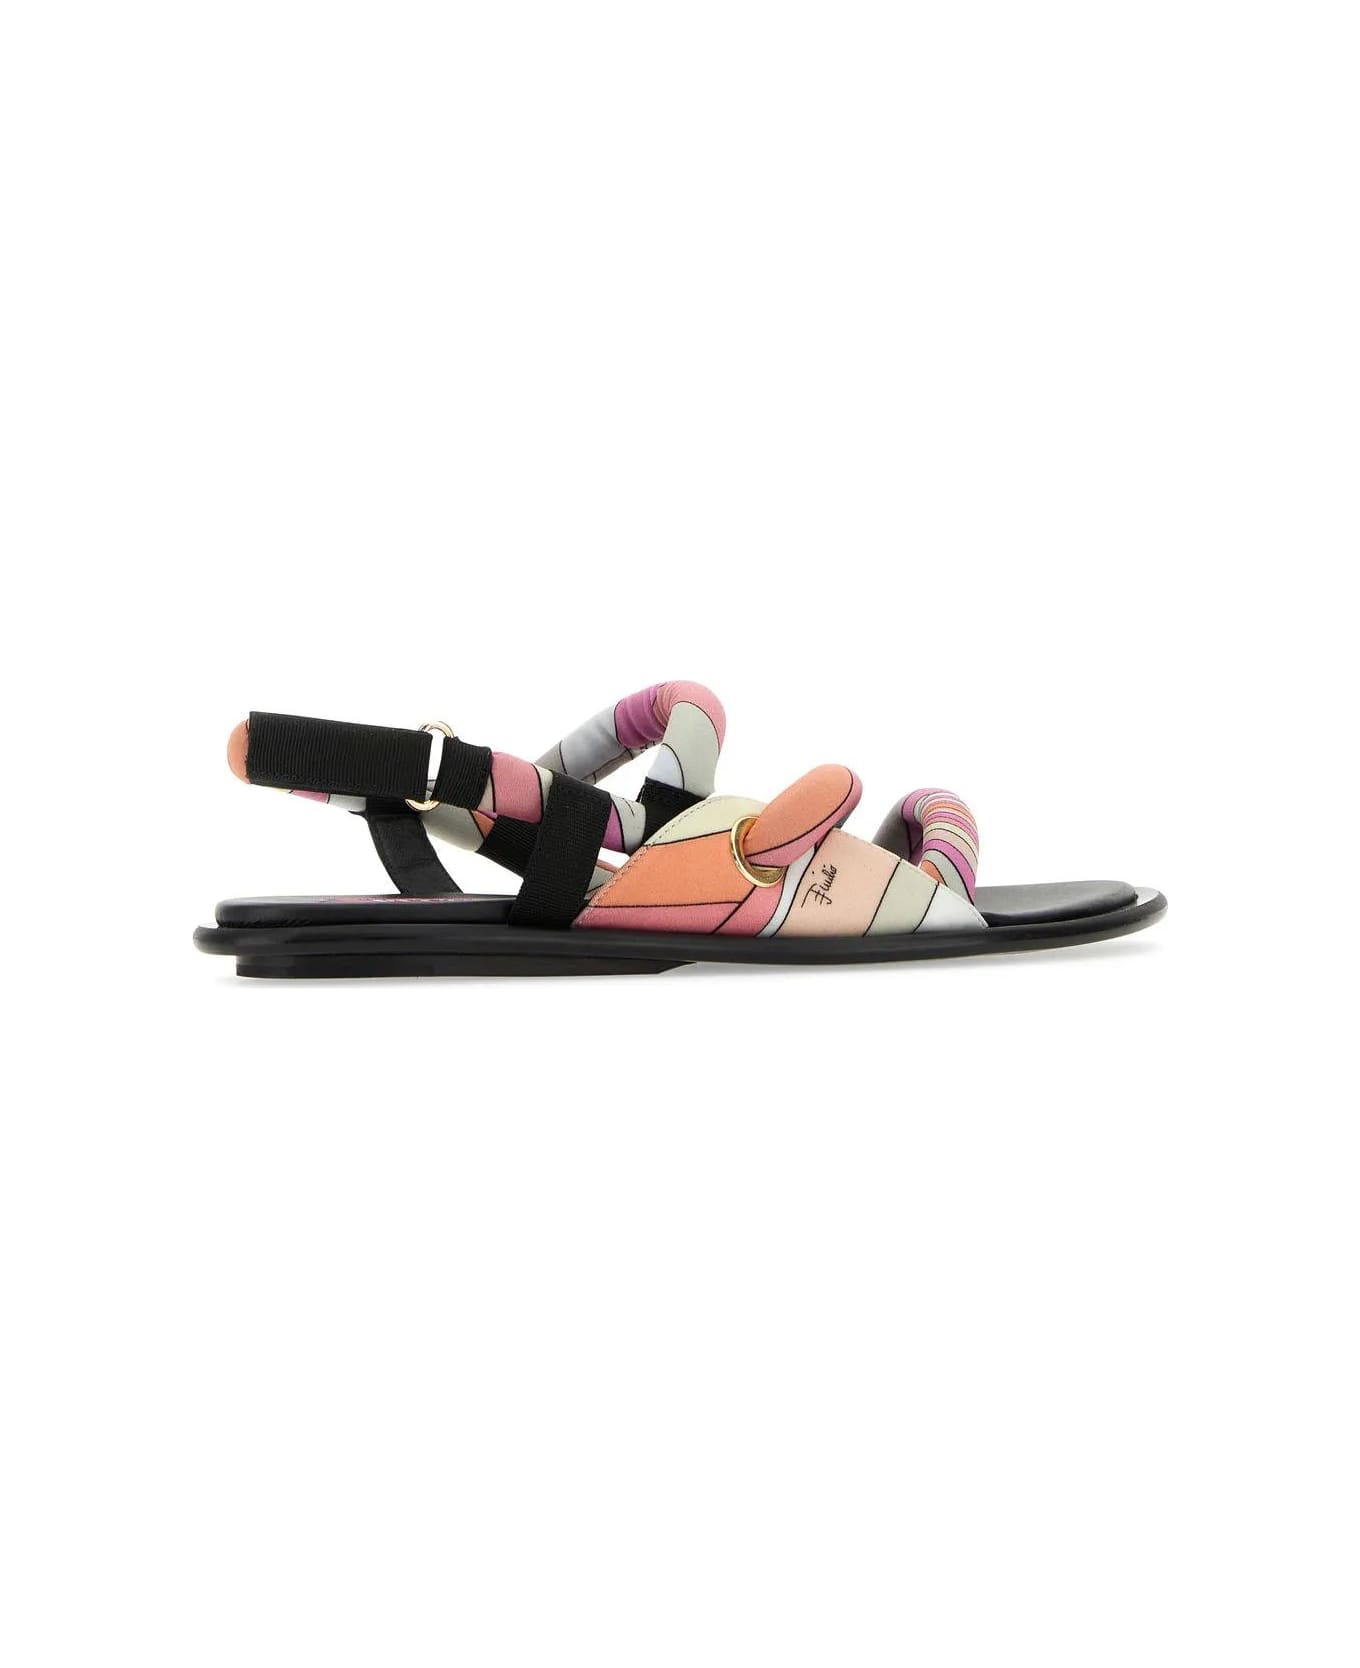 Pucci Printed Fabric Lee Sandals - Pink